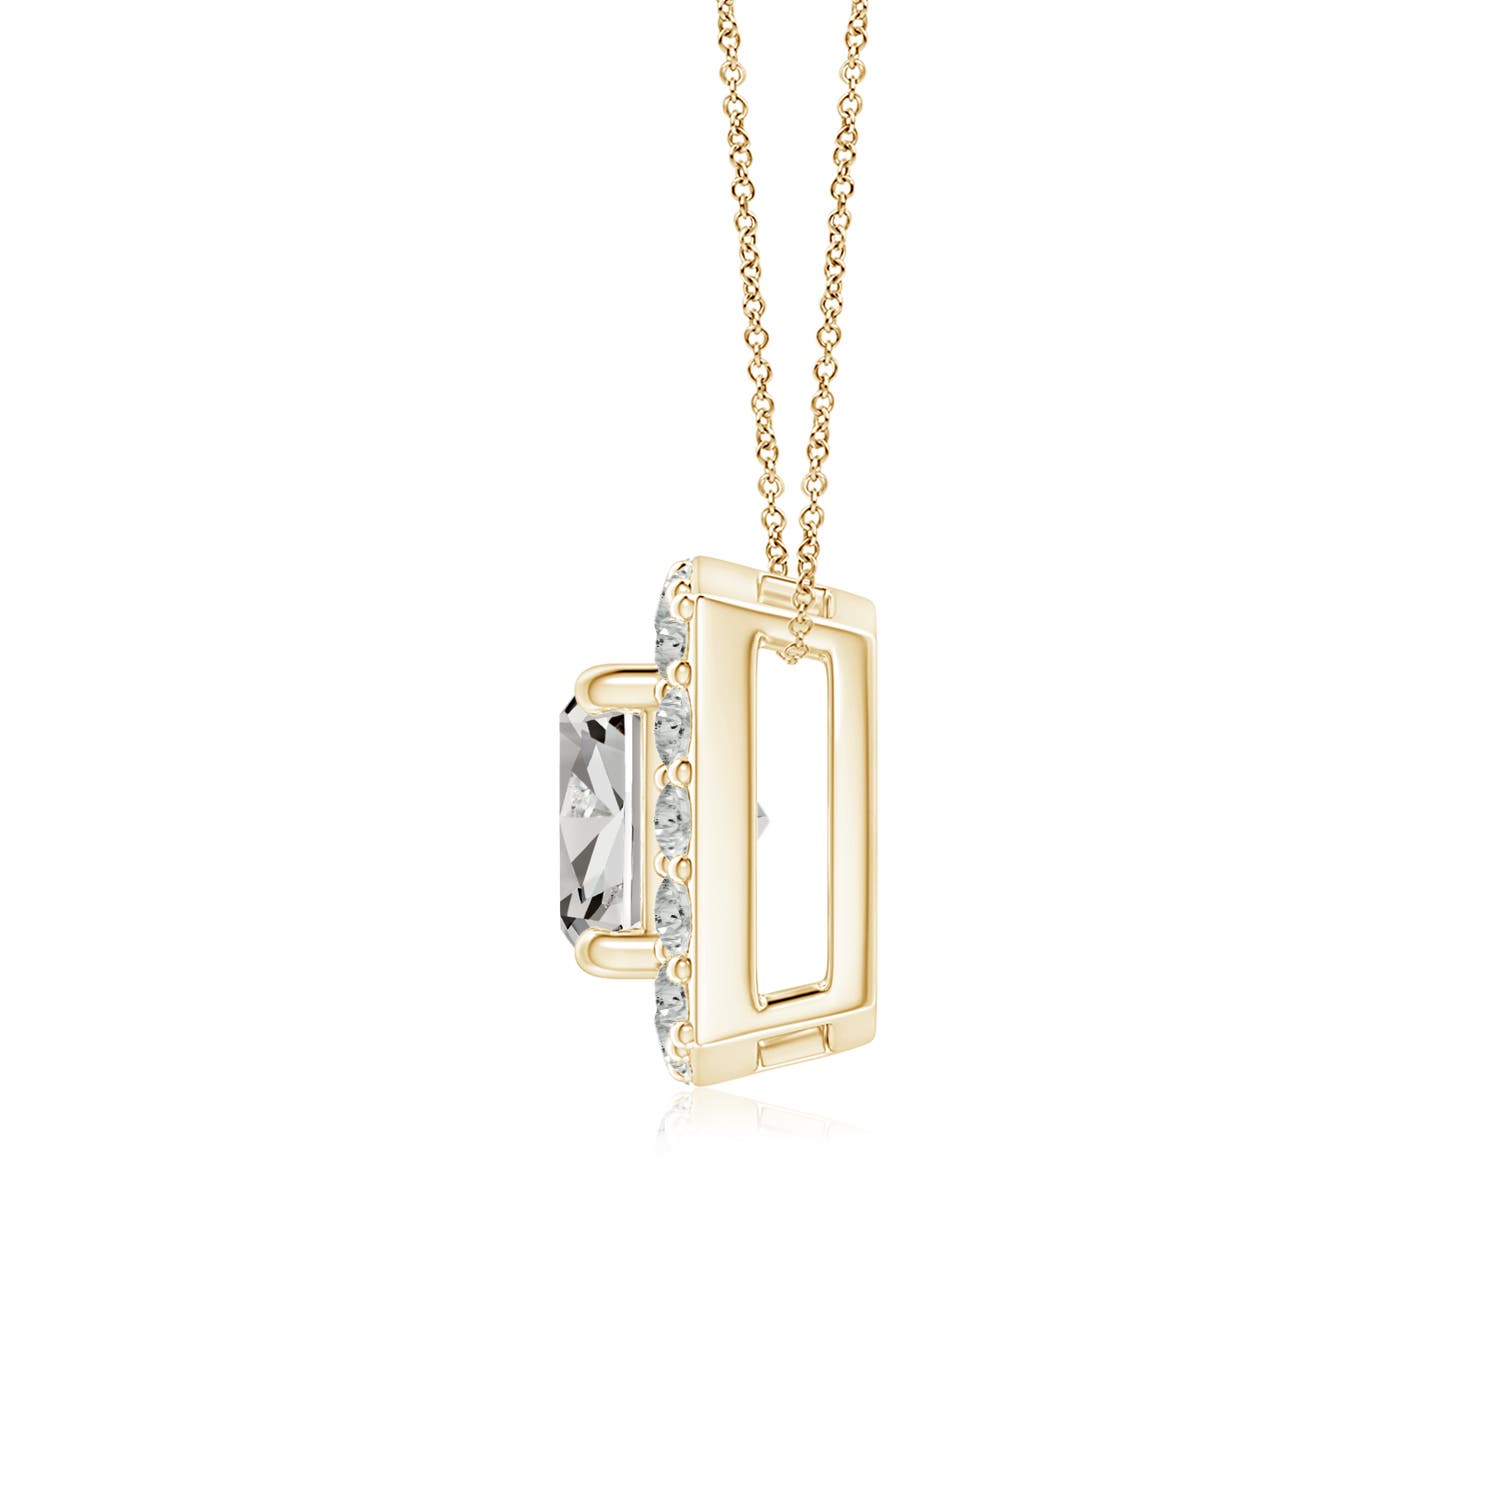 K, I3 / 0.52 CT / 14 KT Yellow Gold